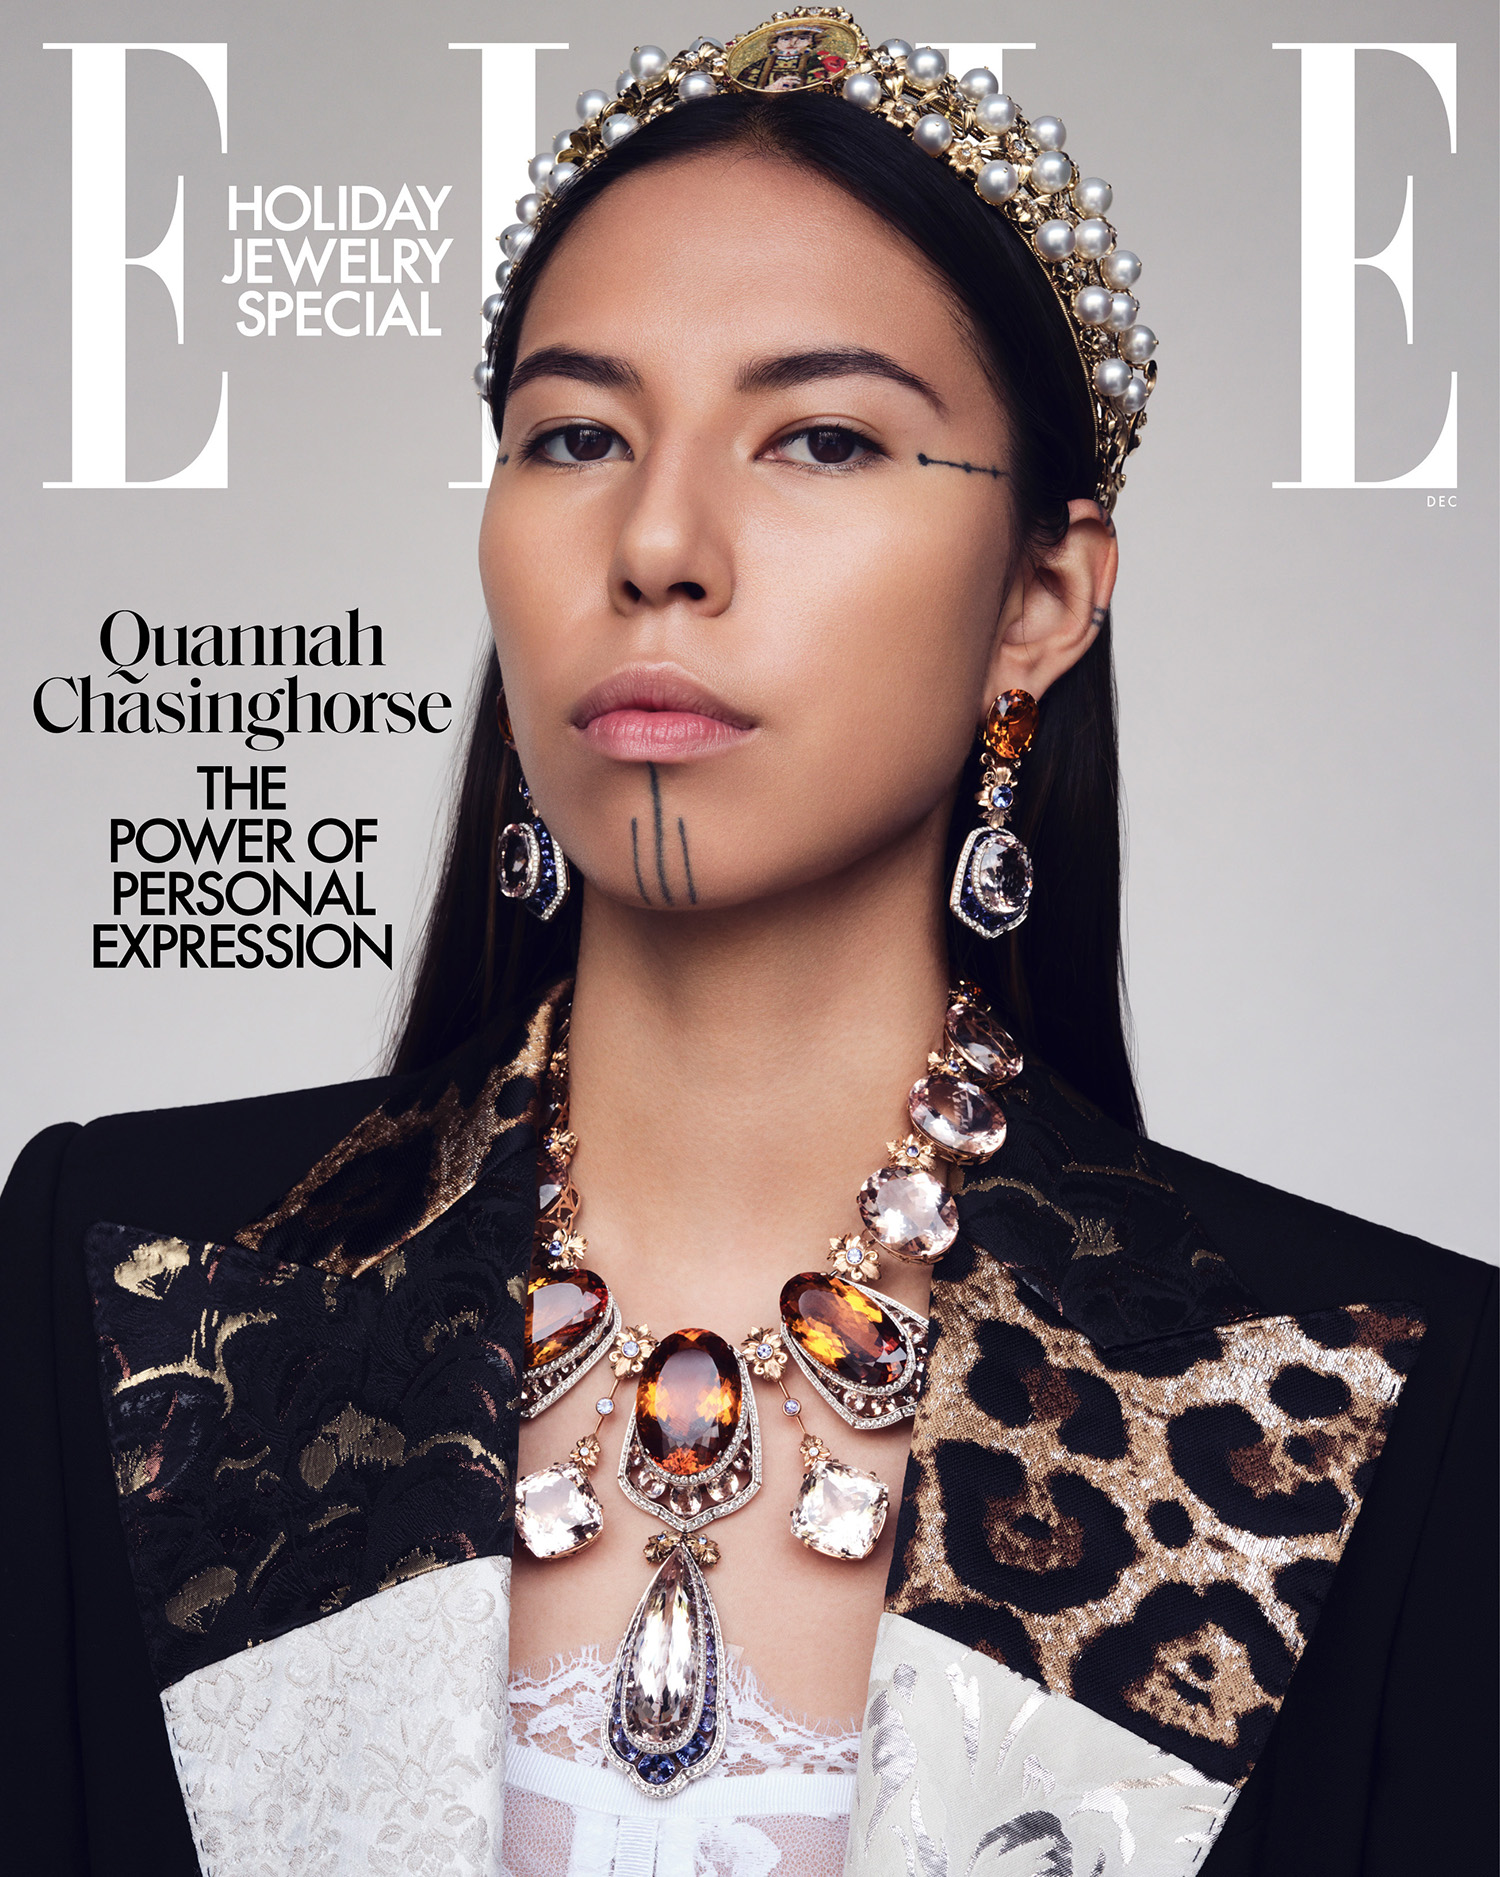 Quannah Chasinghorse in Dolce & Gabbana on Elle US December 2021 Digital Edition cover by Nathaniel Goldberg